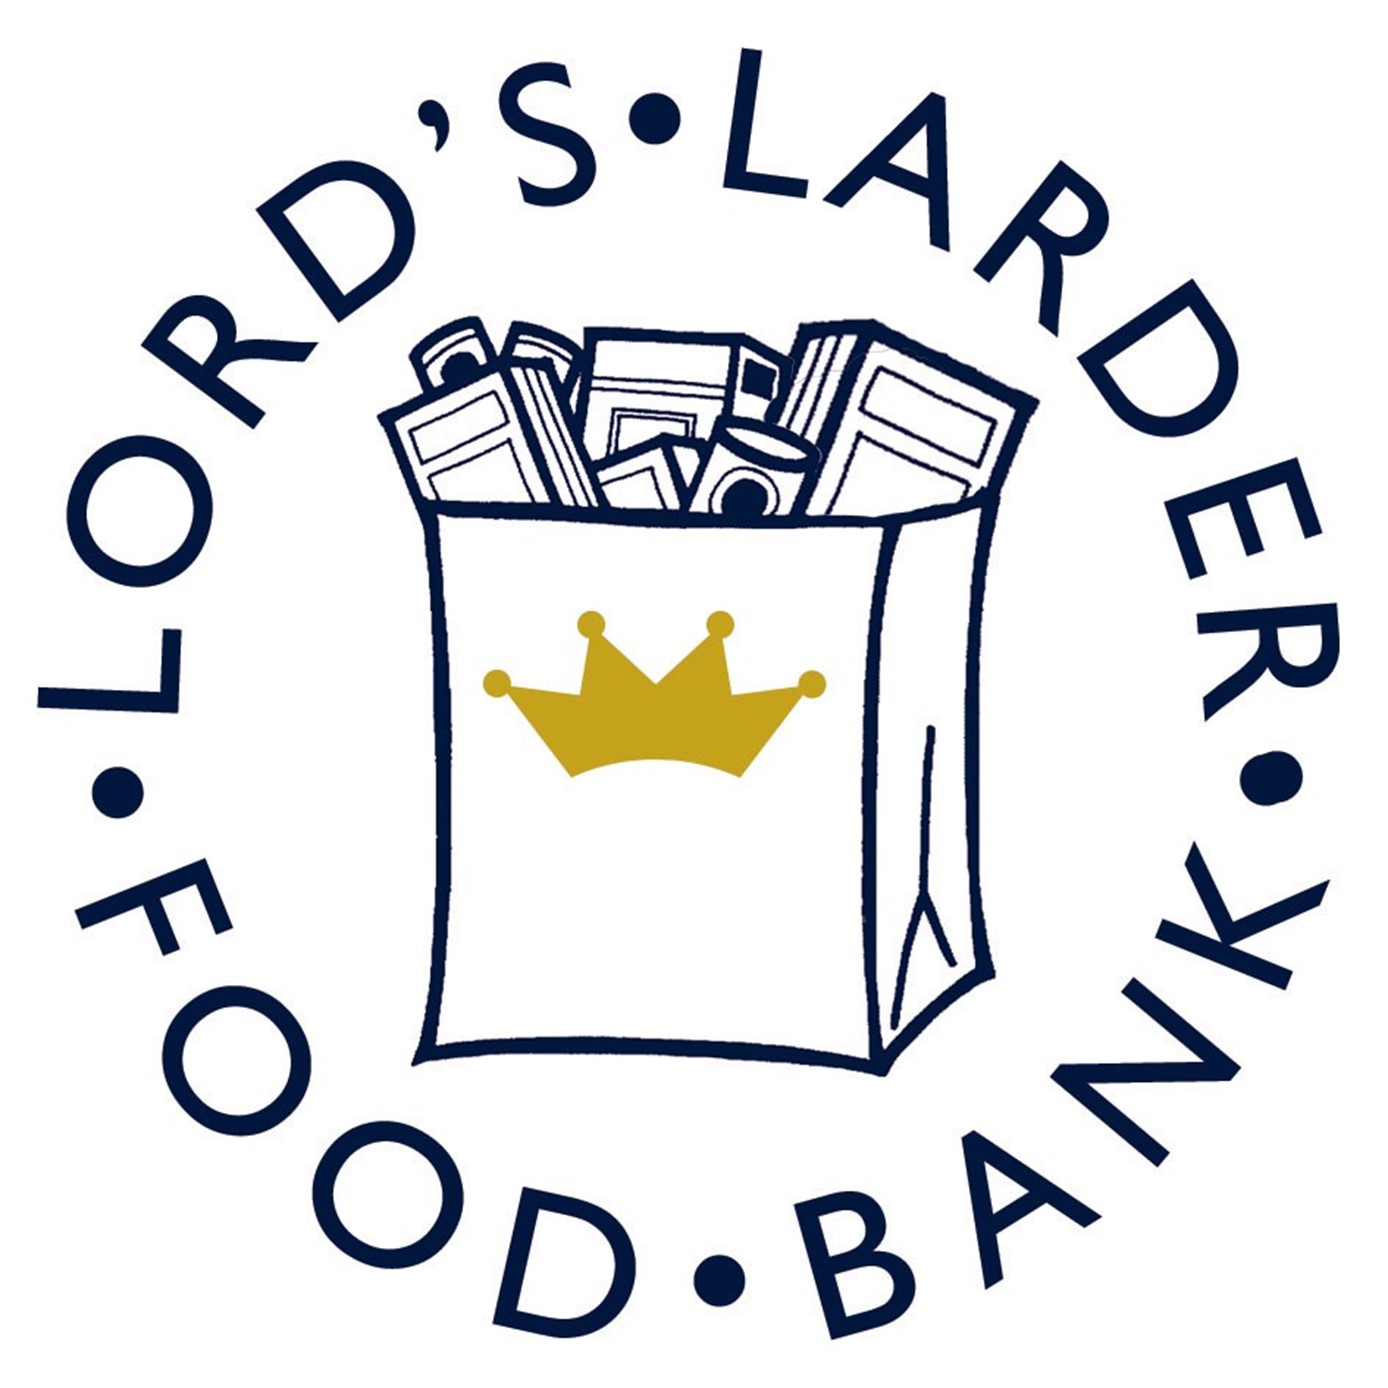 Pleased to continue to support The Lord's Larder Food Bank